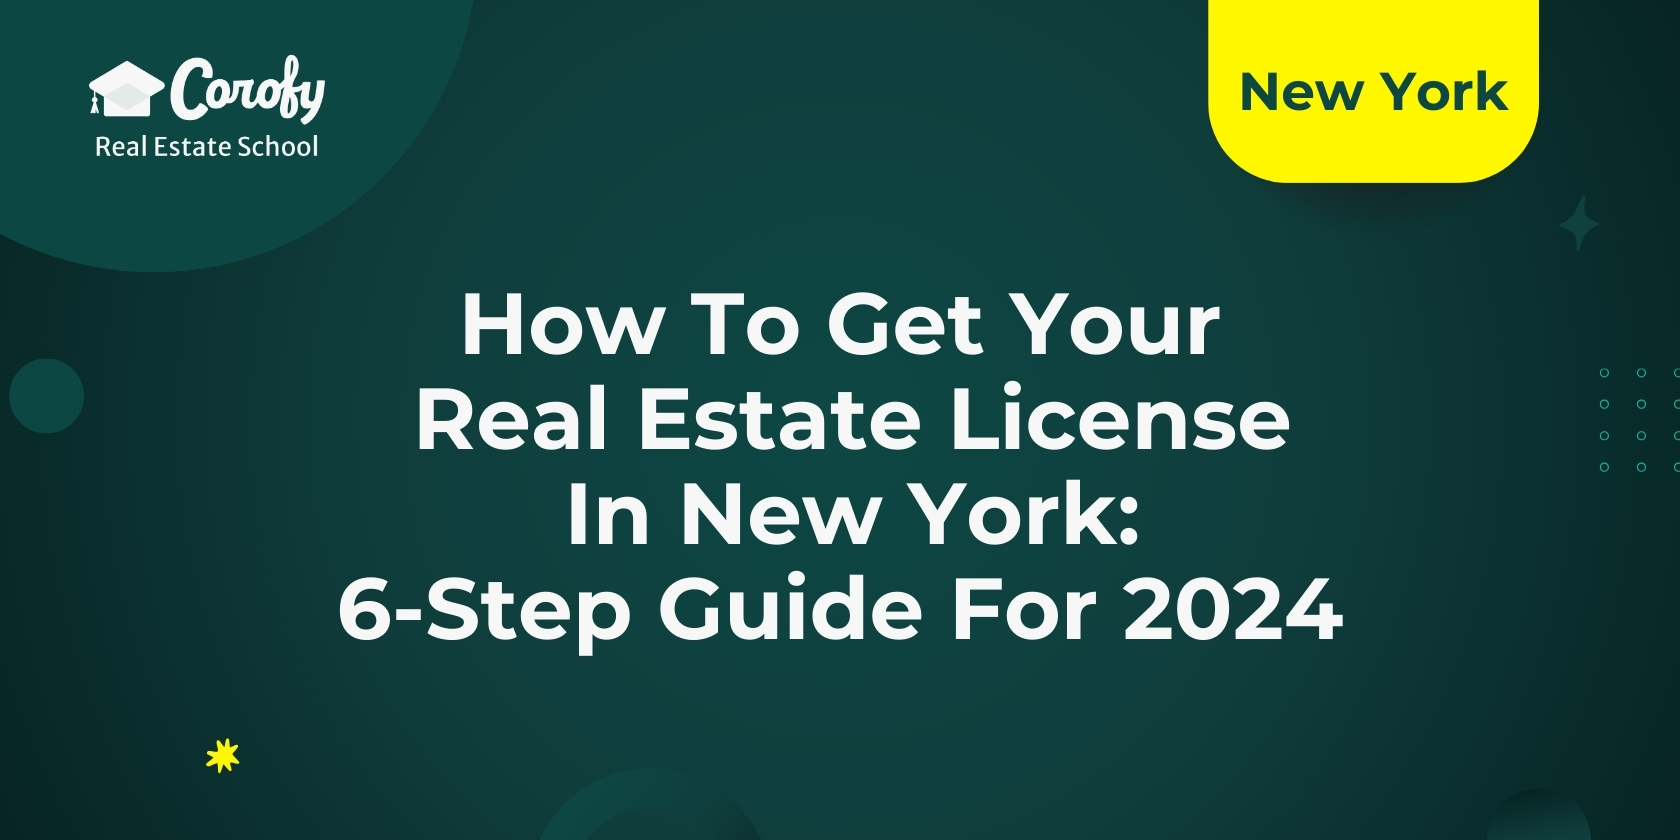 How To Get Your Real Estate License In New York: A 6-Step Guide For 2024